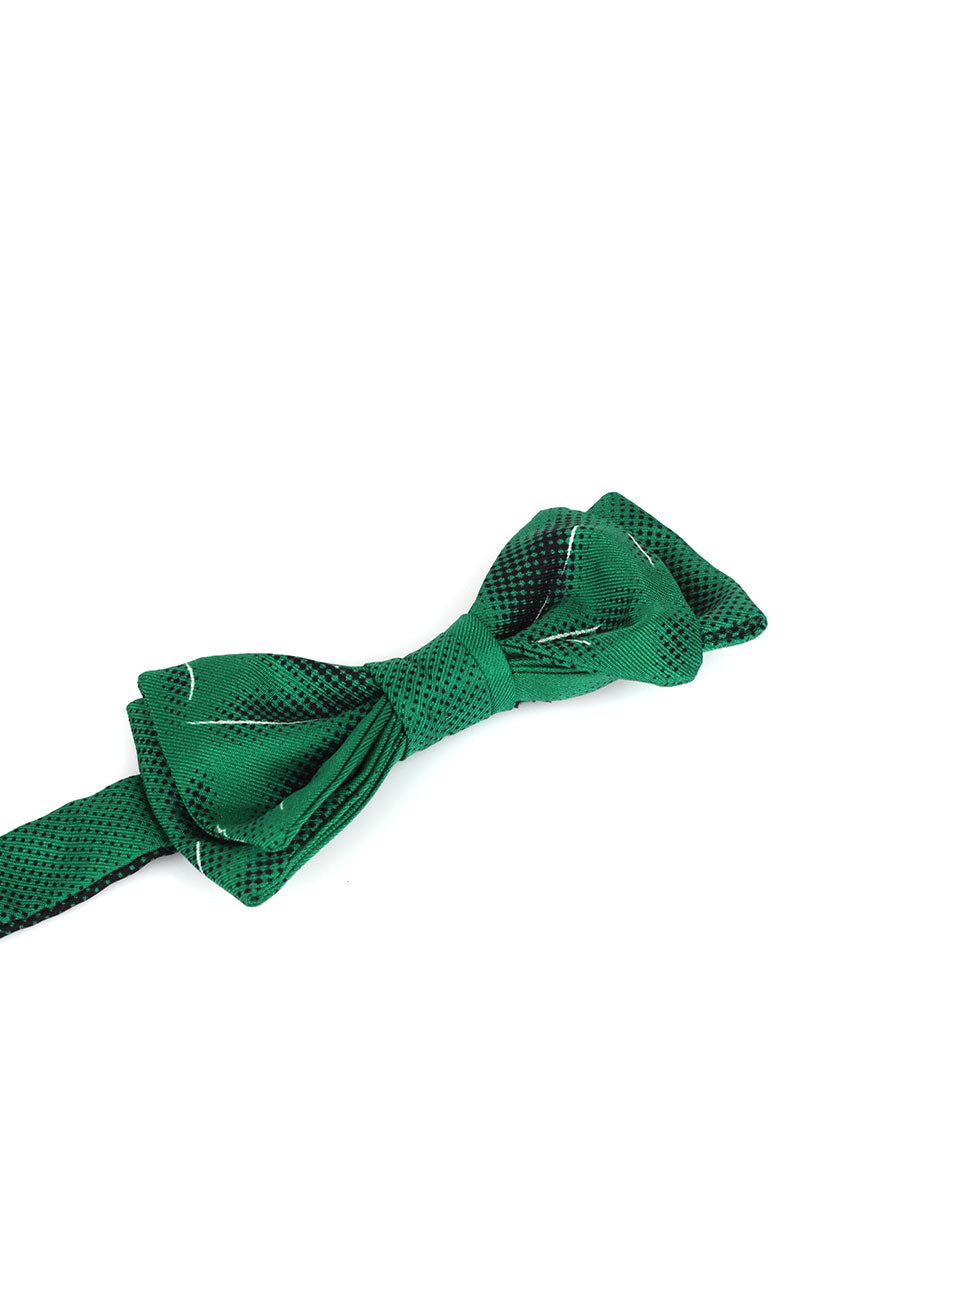 ABSTRACT GREEN BOW TIE